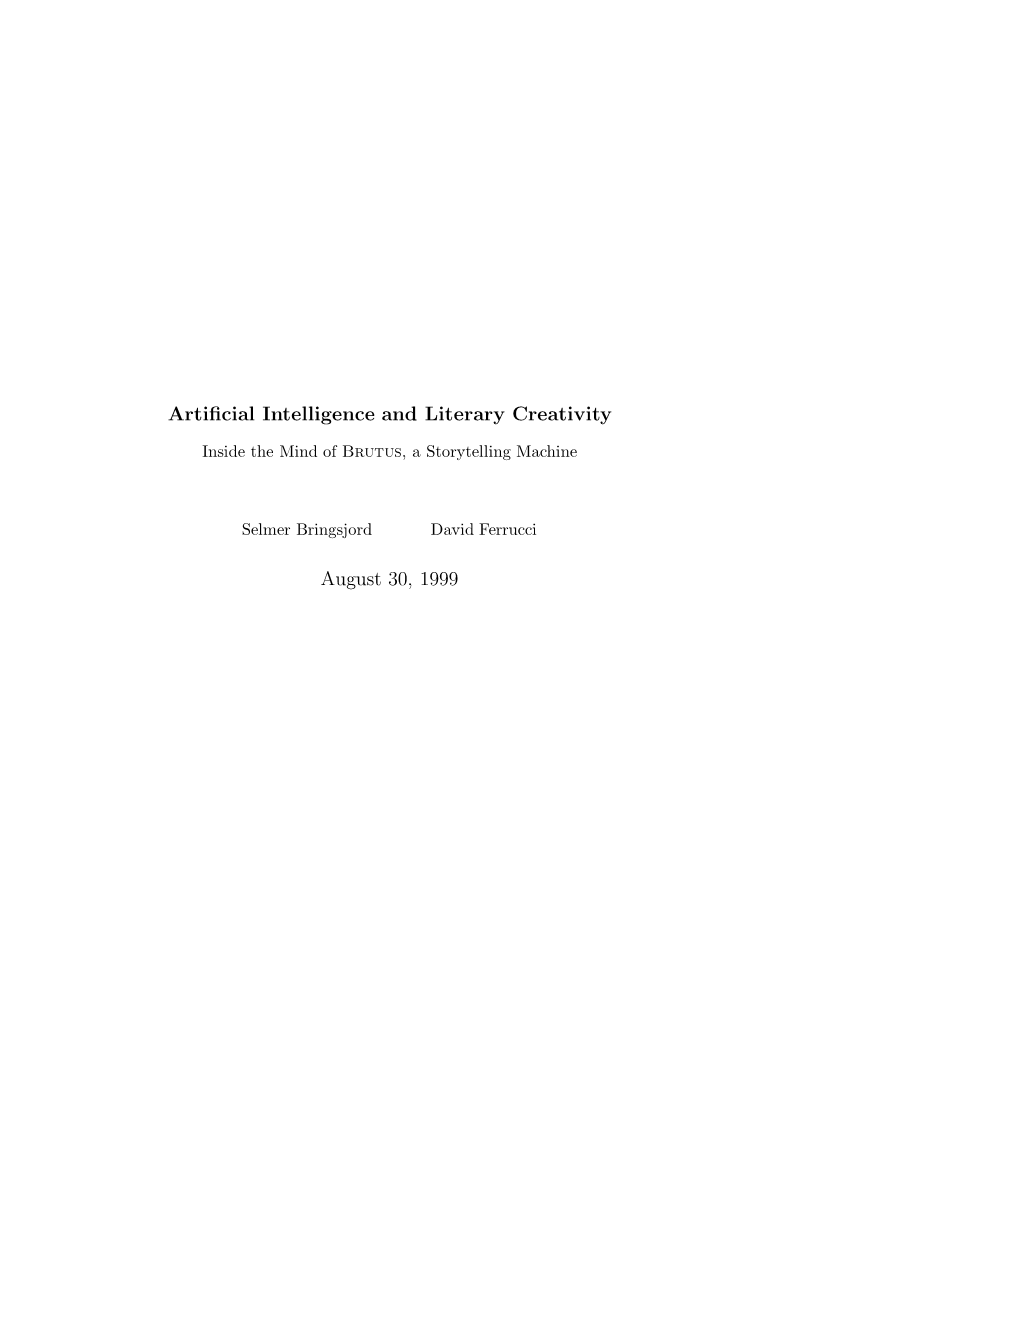 Artificial Intelligence and Literary Creativity August 30, 1999